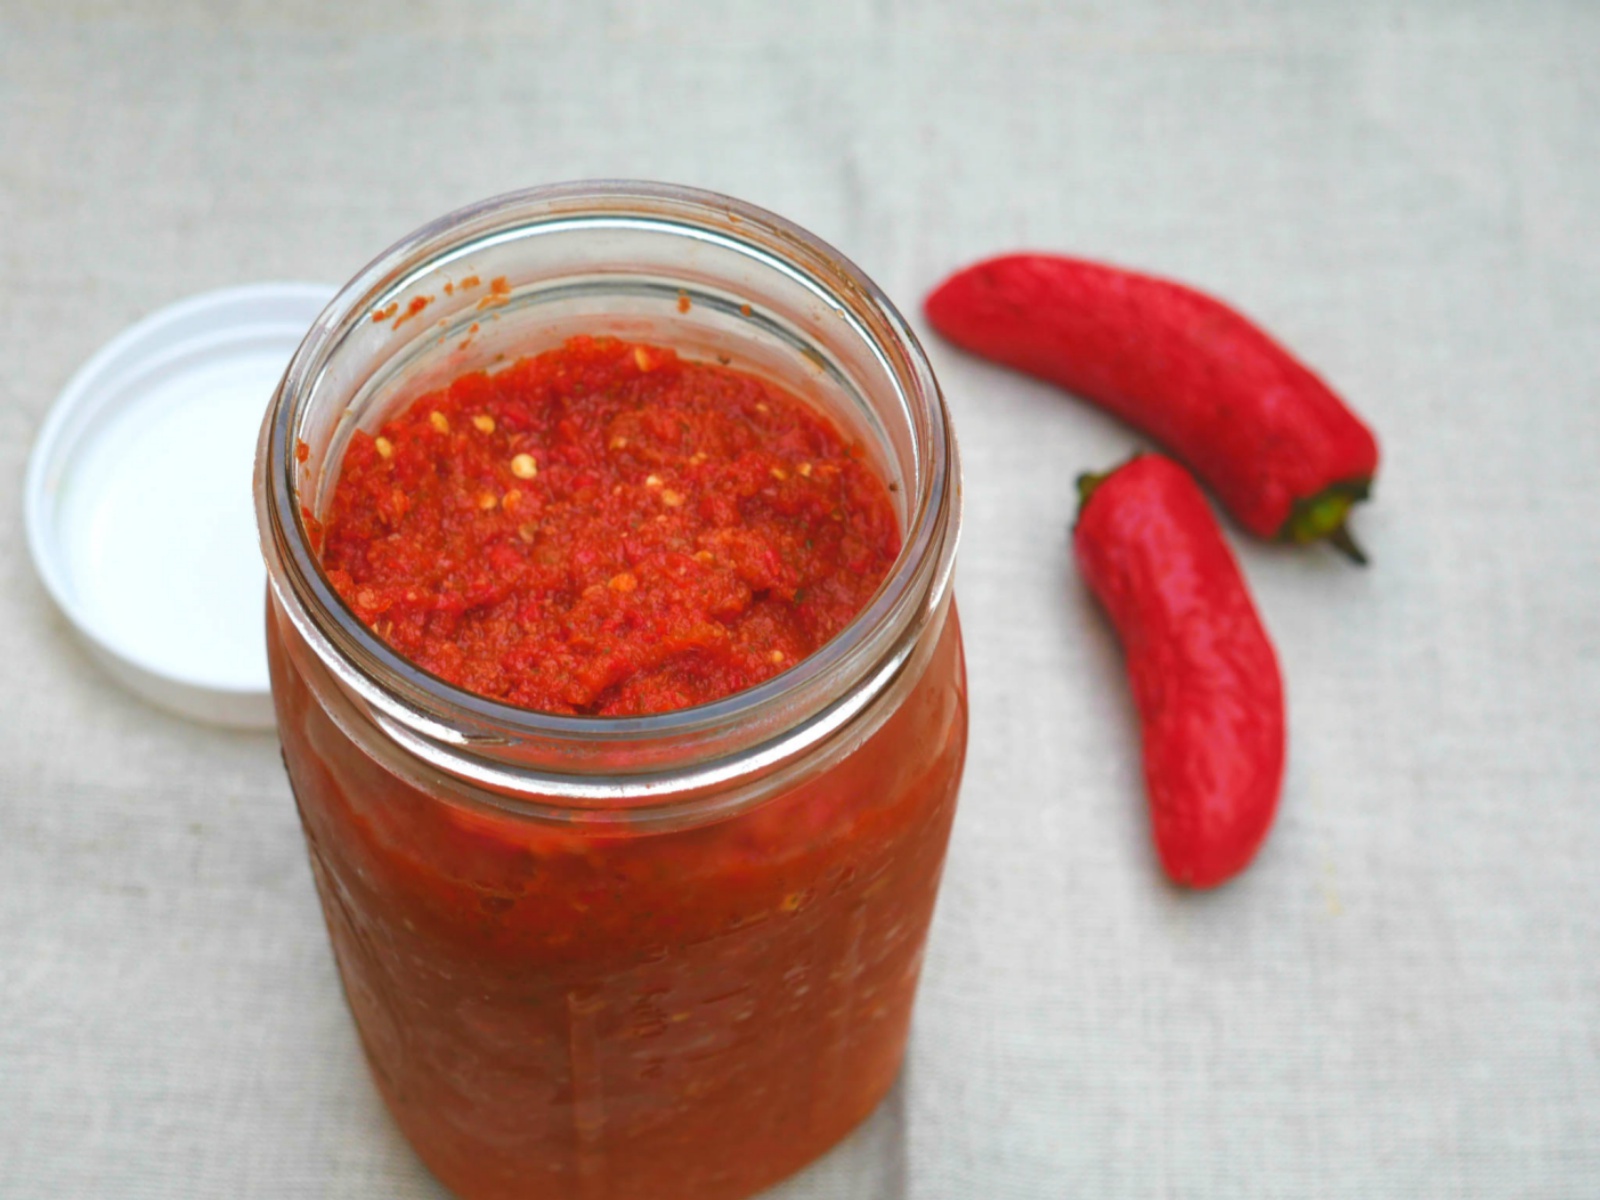 A bright red, spicy, flavorful hot sauce - raw and homemade